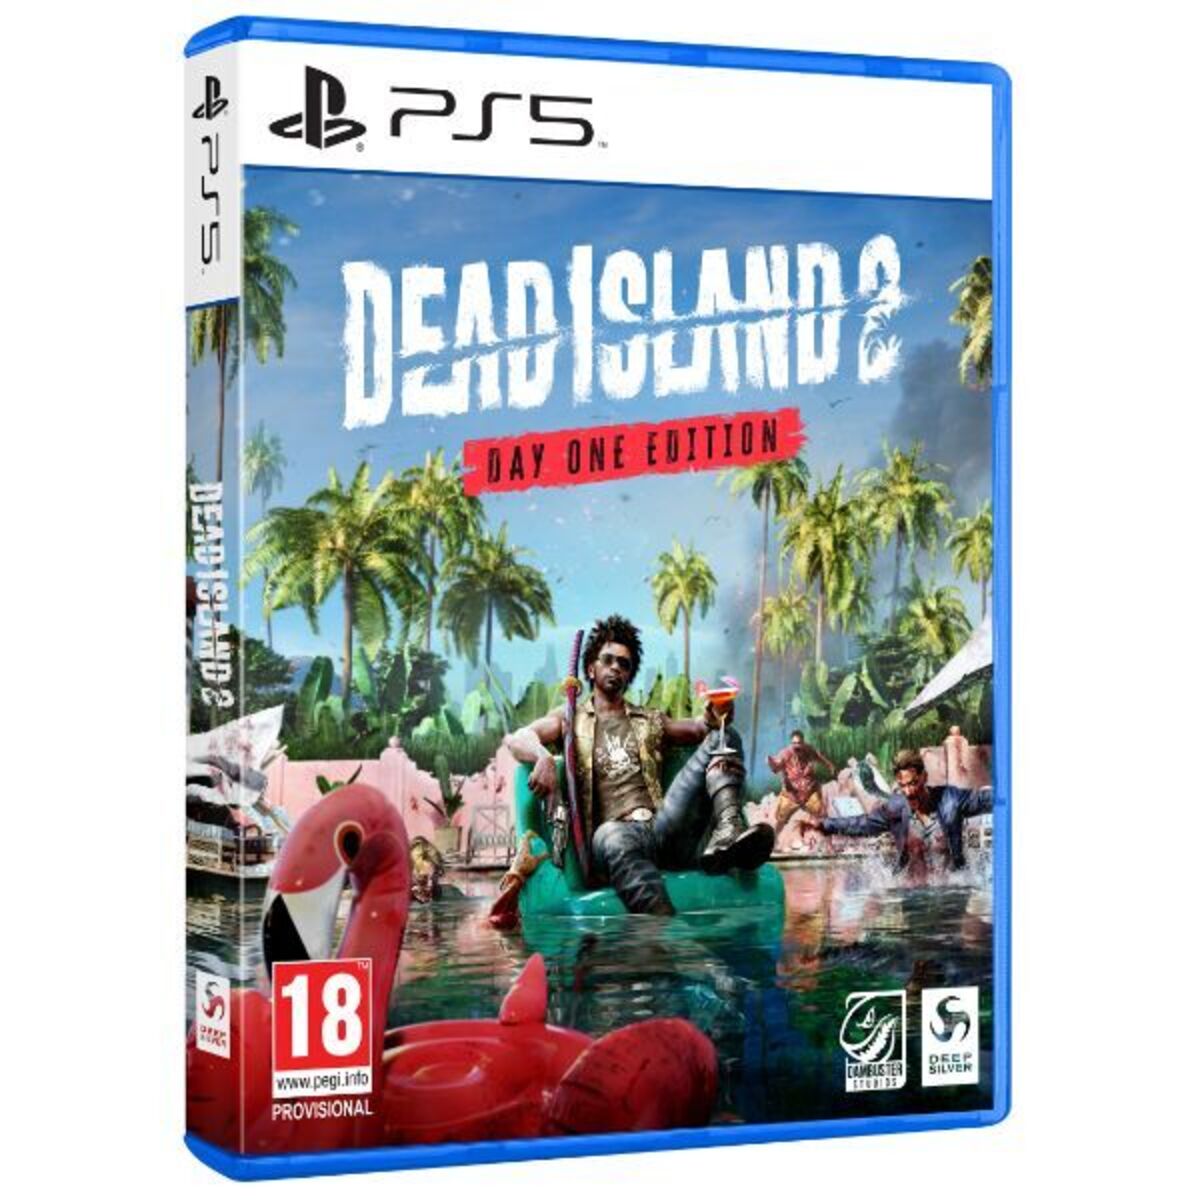 Buy Dead Island 2 - Day One Edition - PlayStation 5 PS5 - ShopTo.net